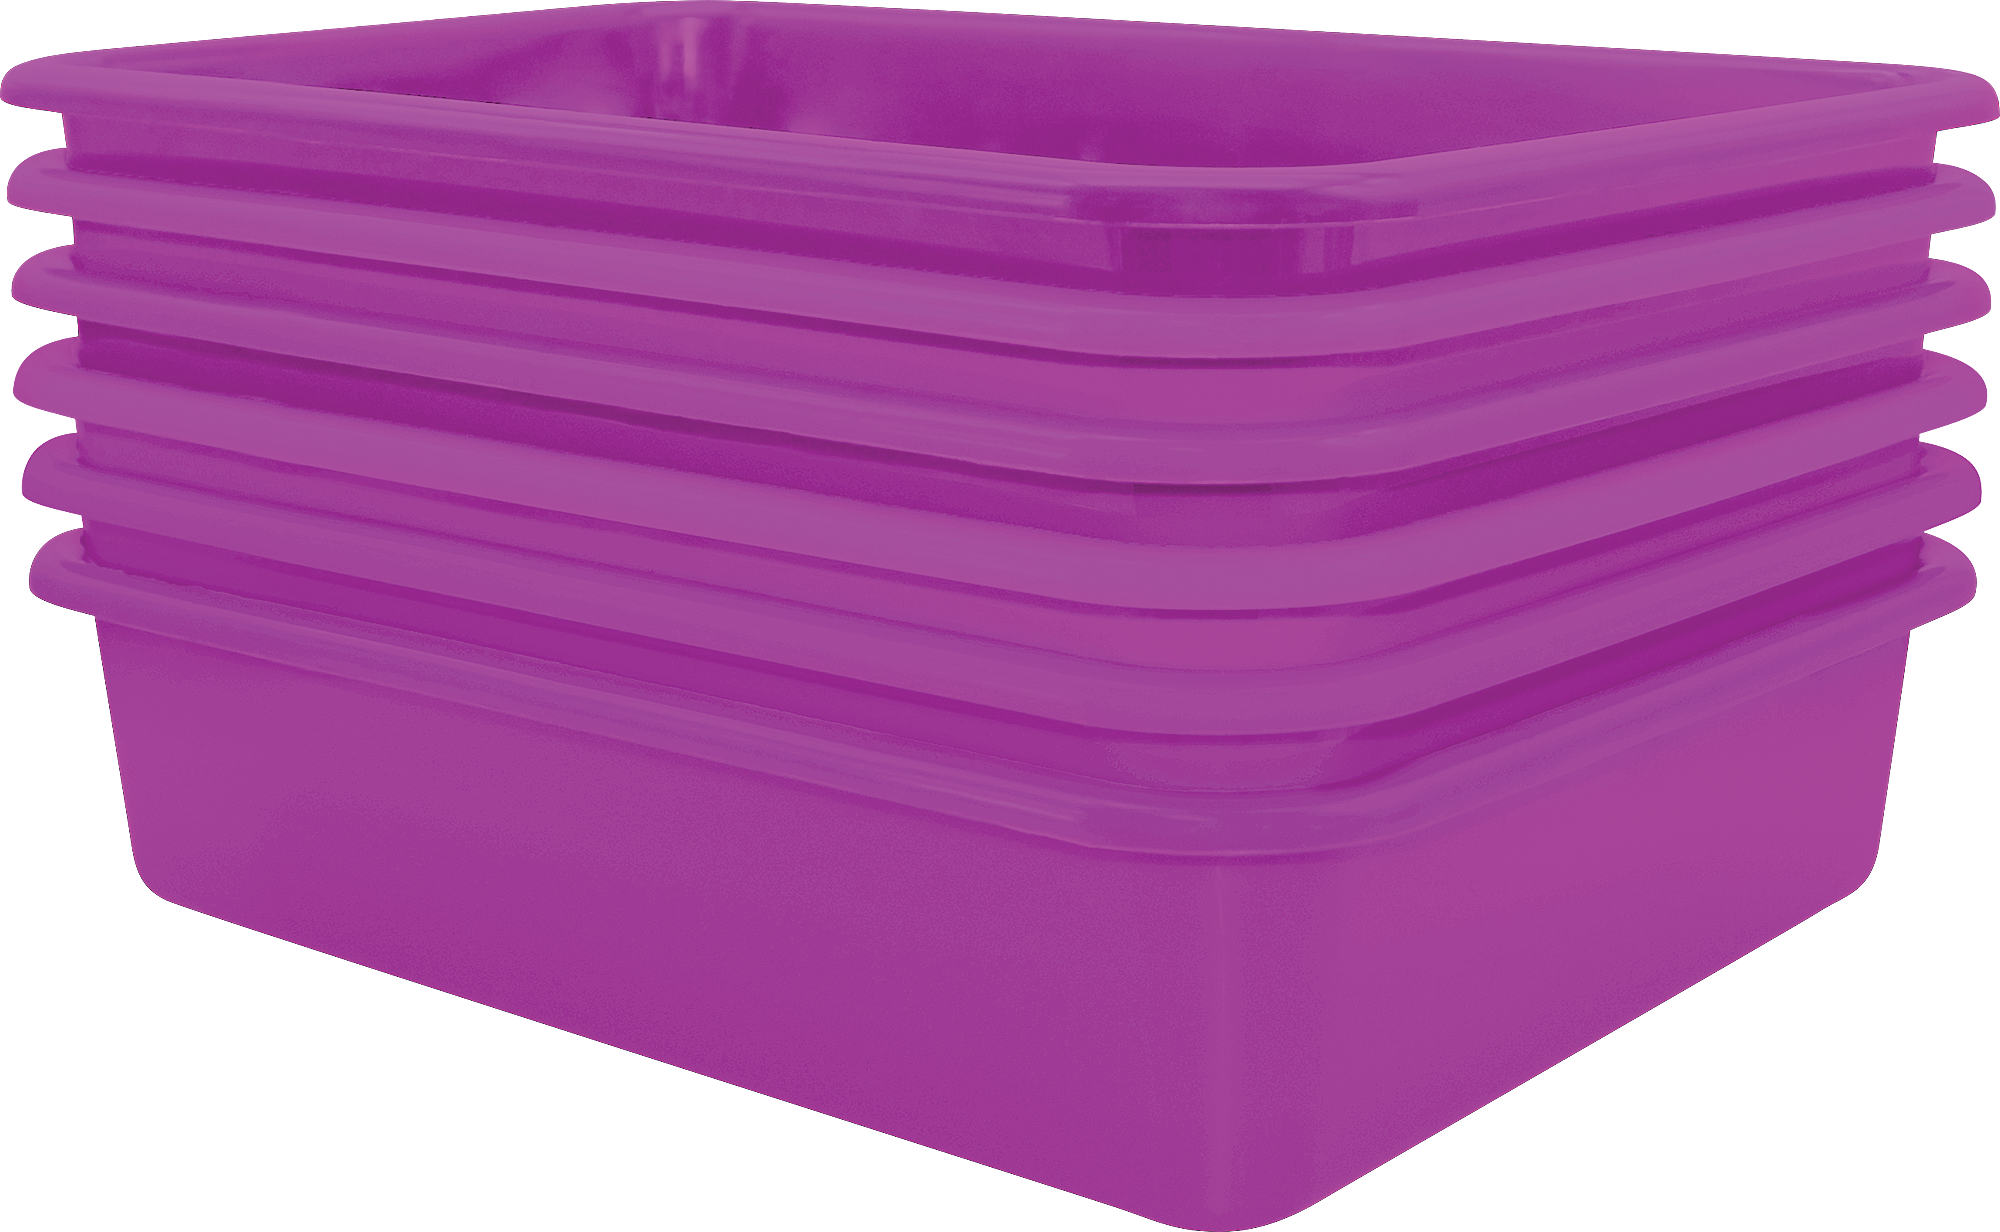 Teacher Created Resources Lime Large Plastic Storage Bin, Pack of 3